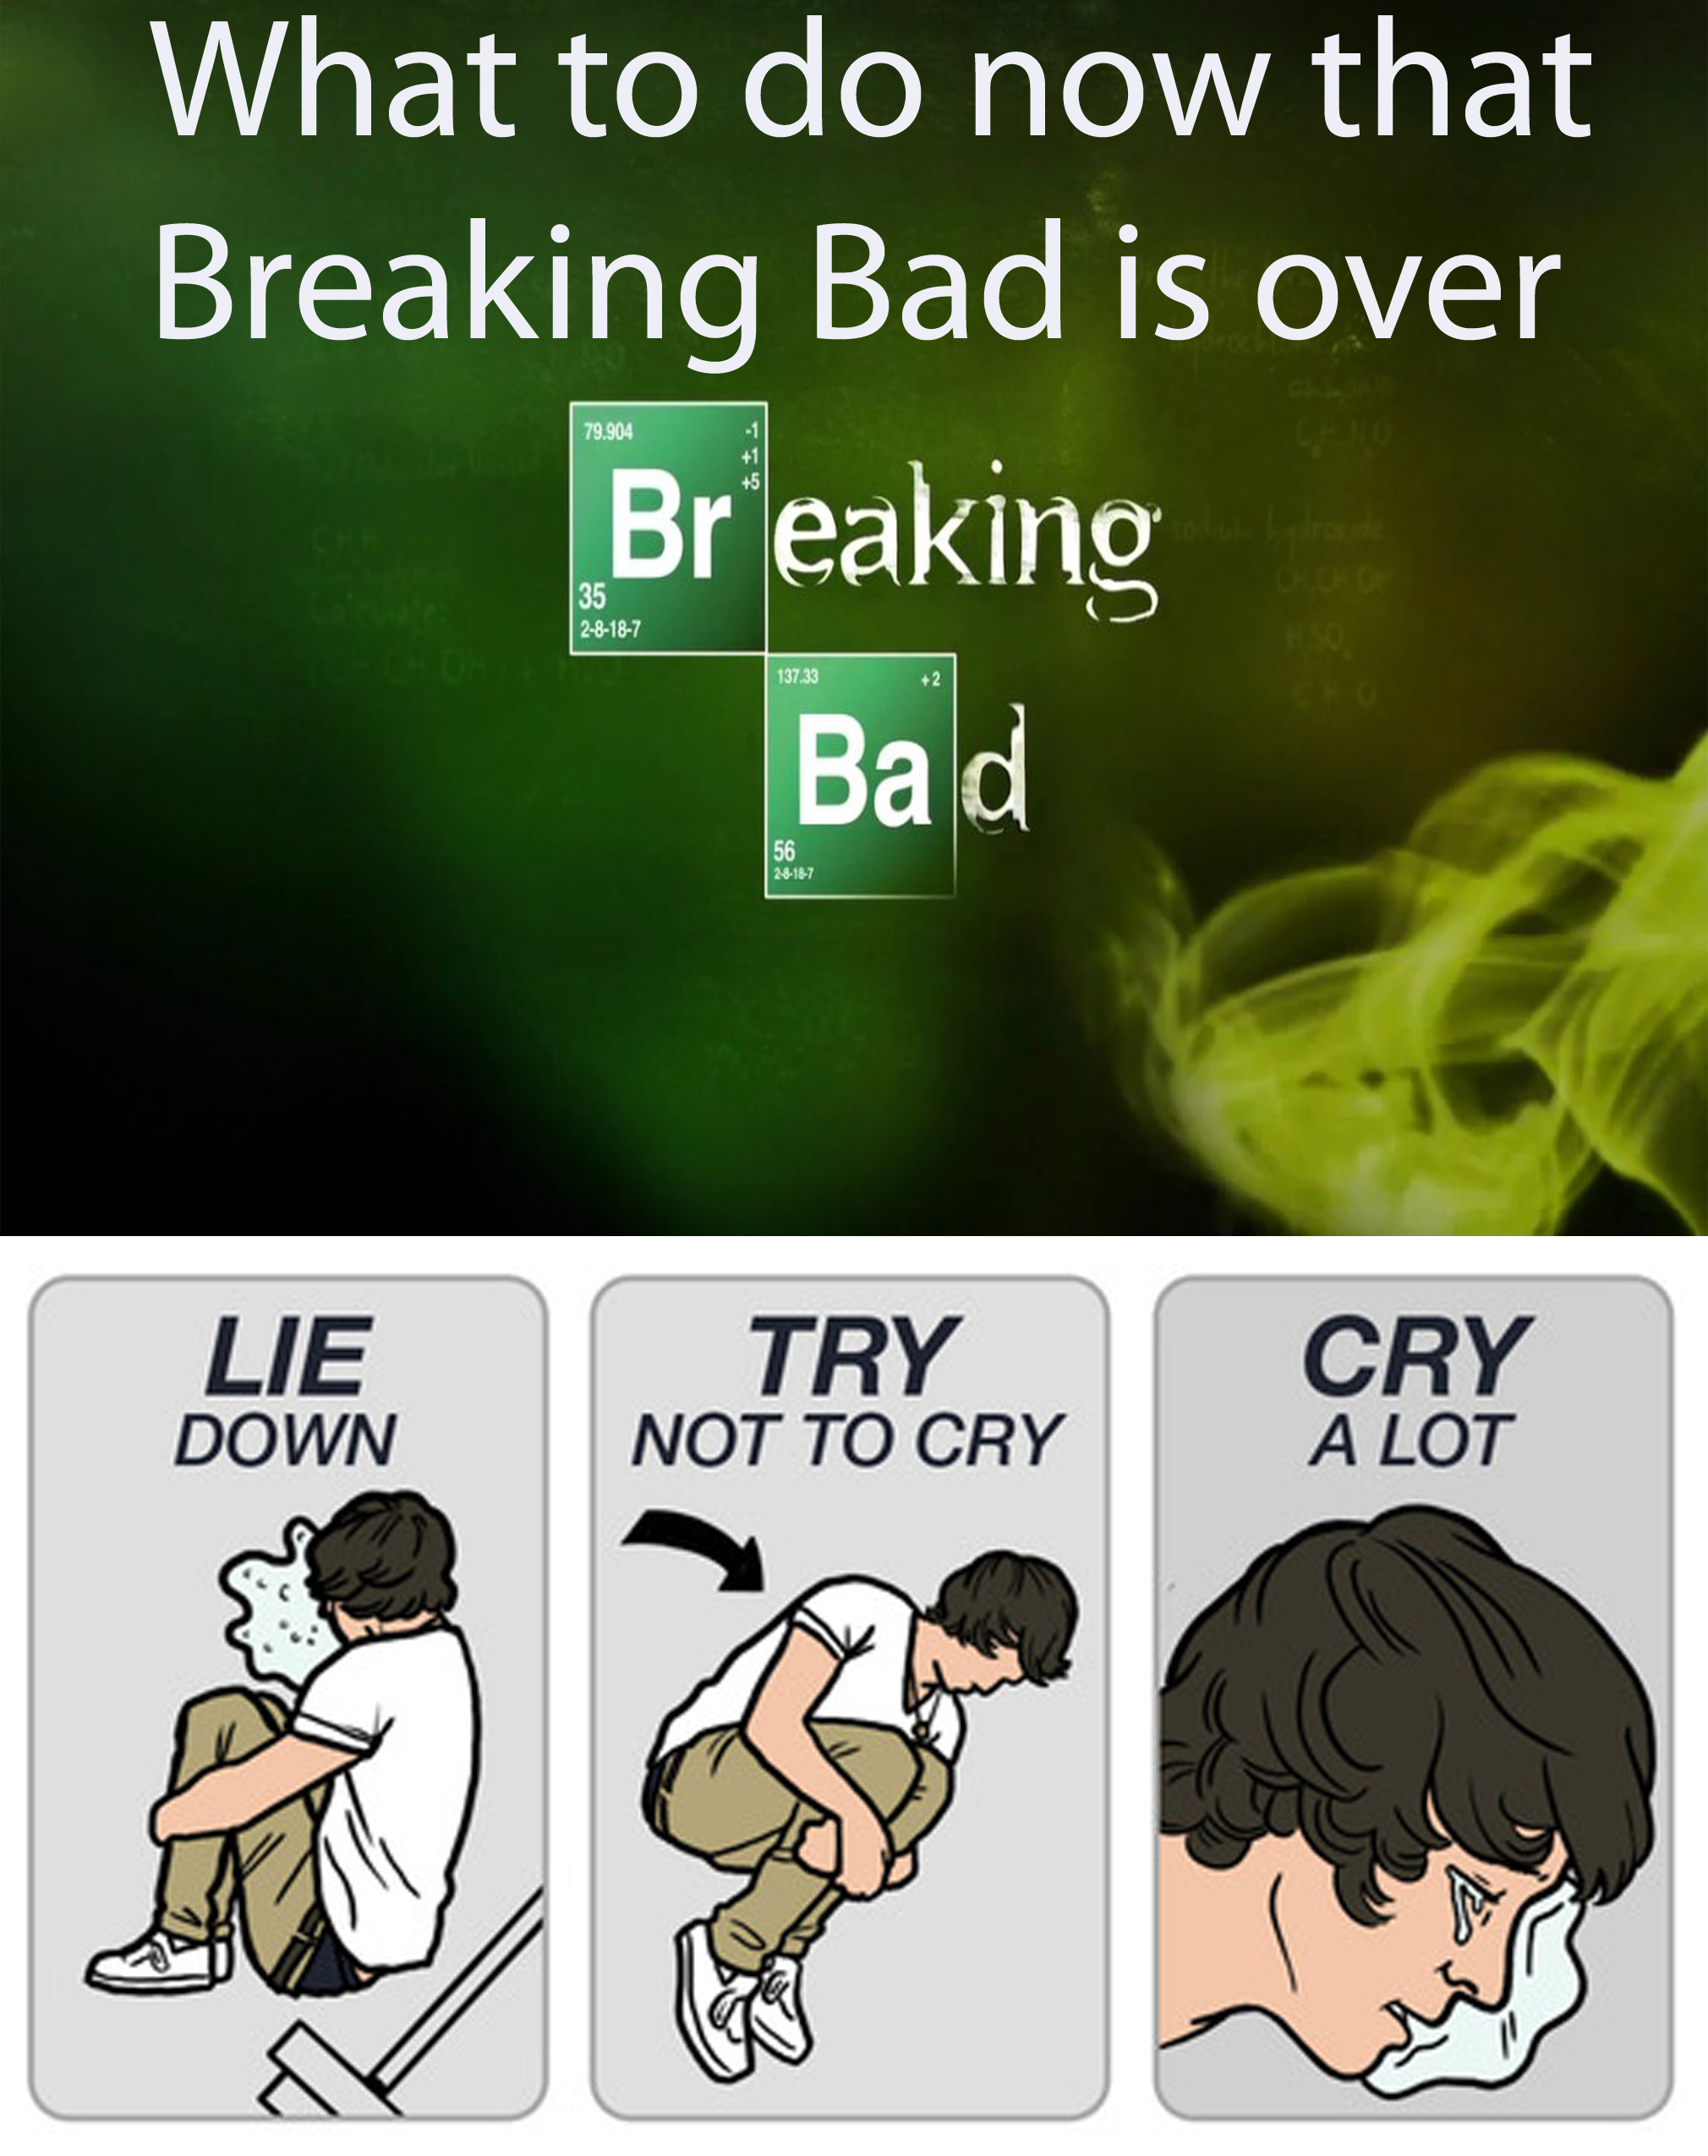 How to cope with the end of Breaking Bad.